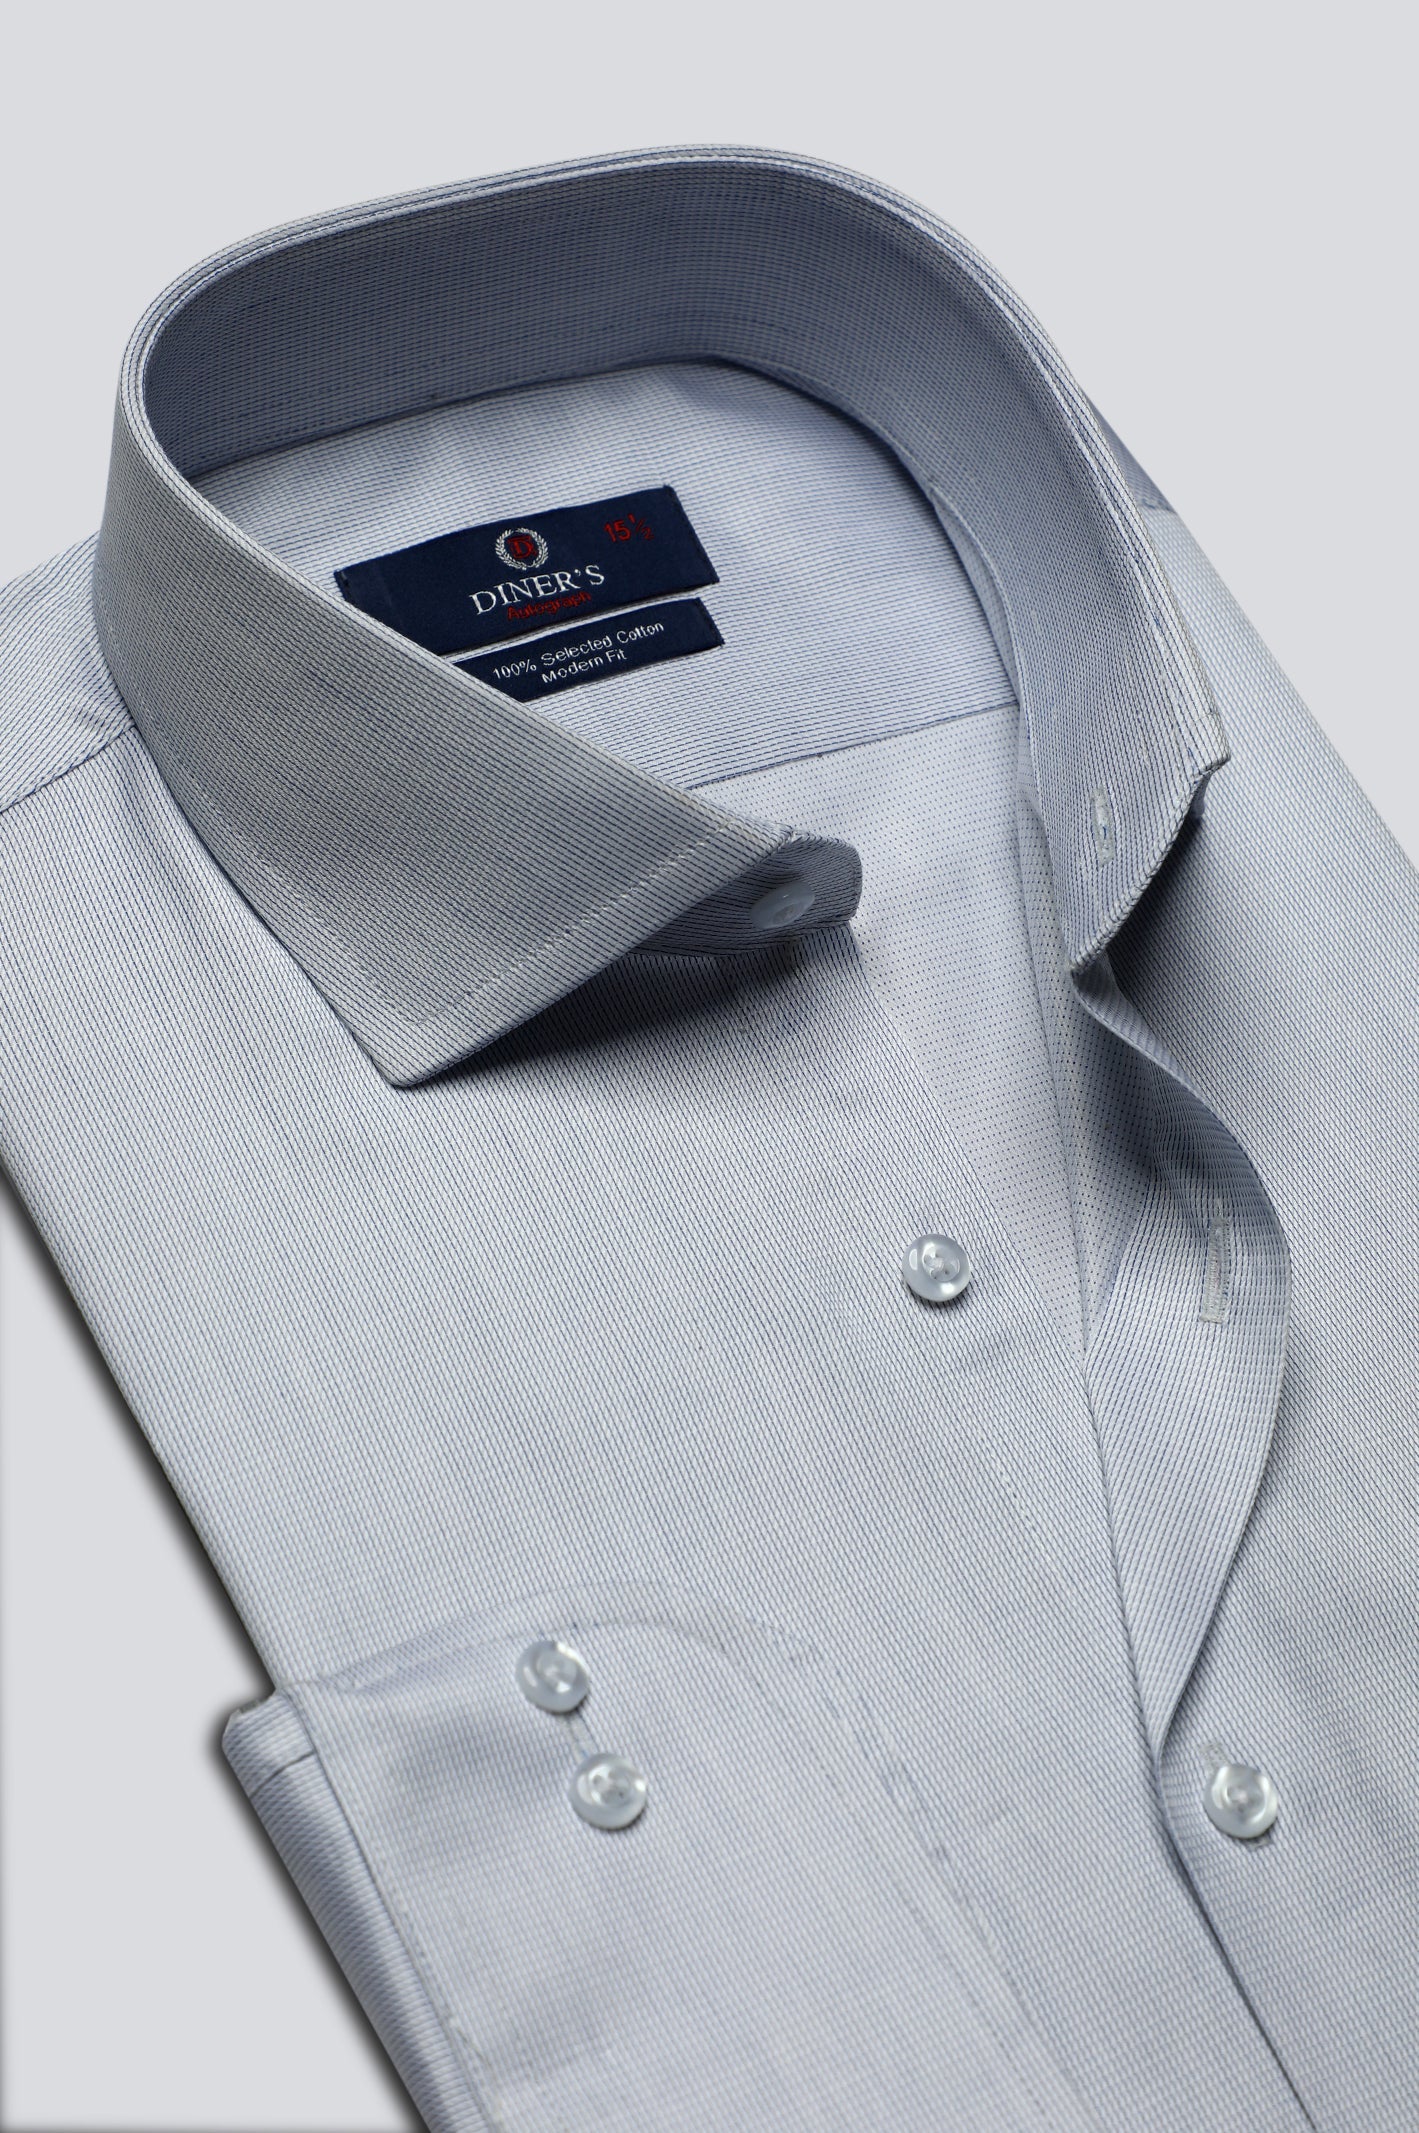 White Self Formal Autograph Shirt for Men - Diners